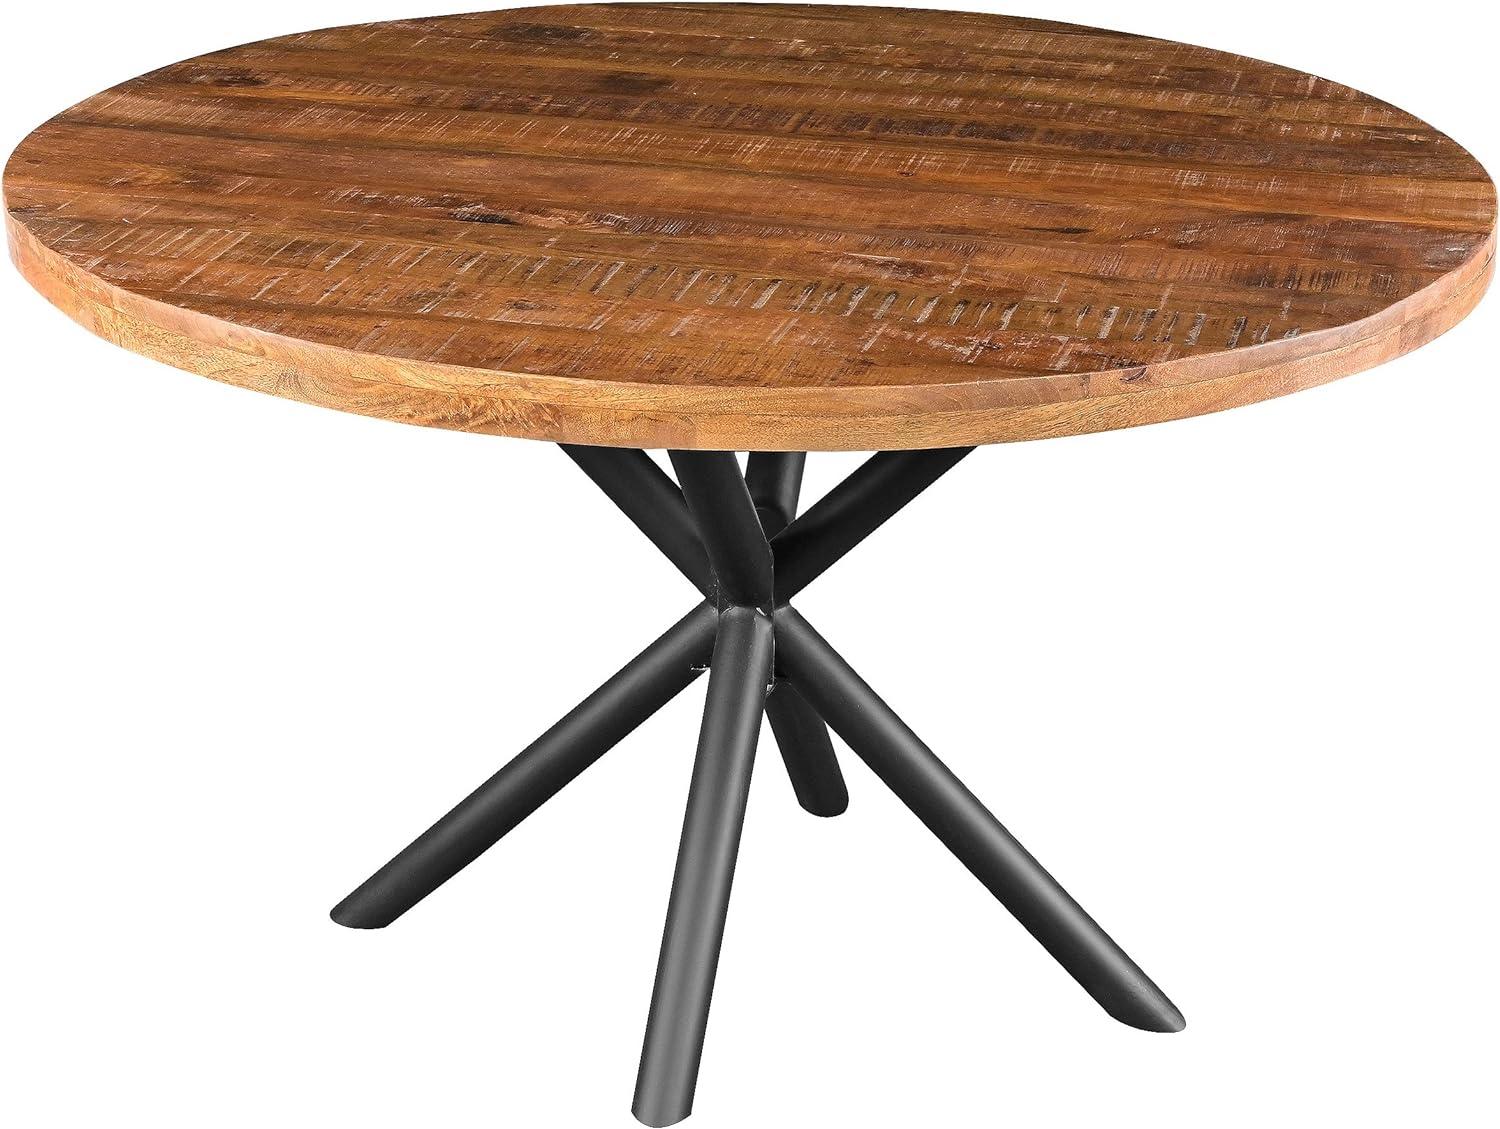 Rustic Farmhouse 48" Round Solid Mango Wood Dining Table with Iron Legs